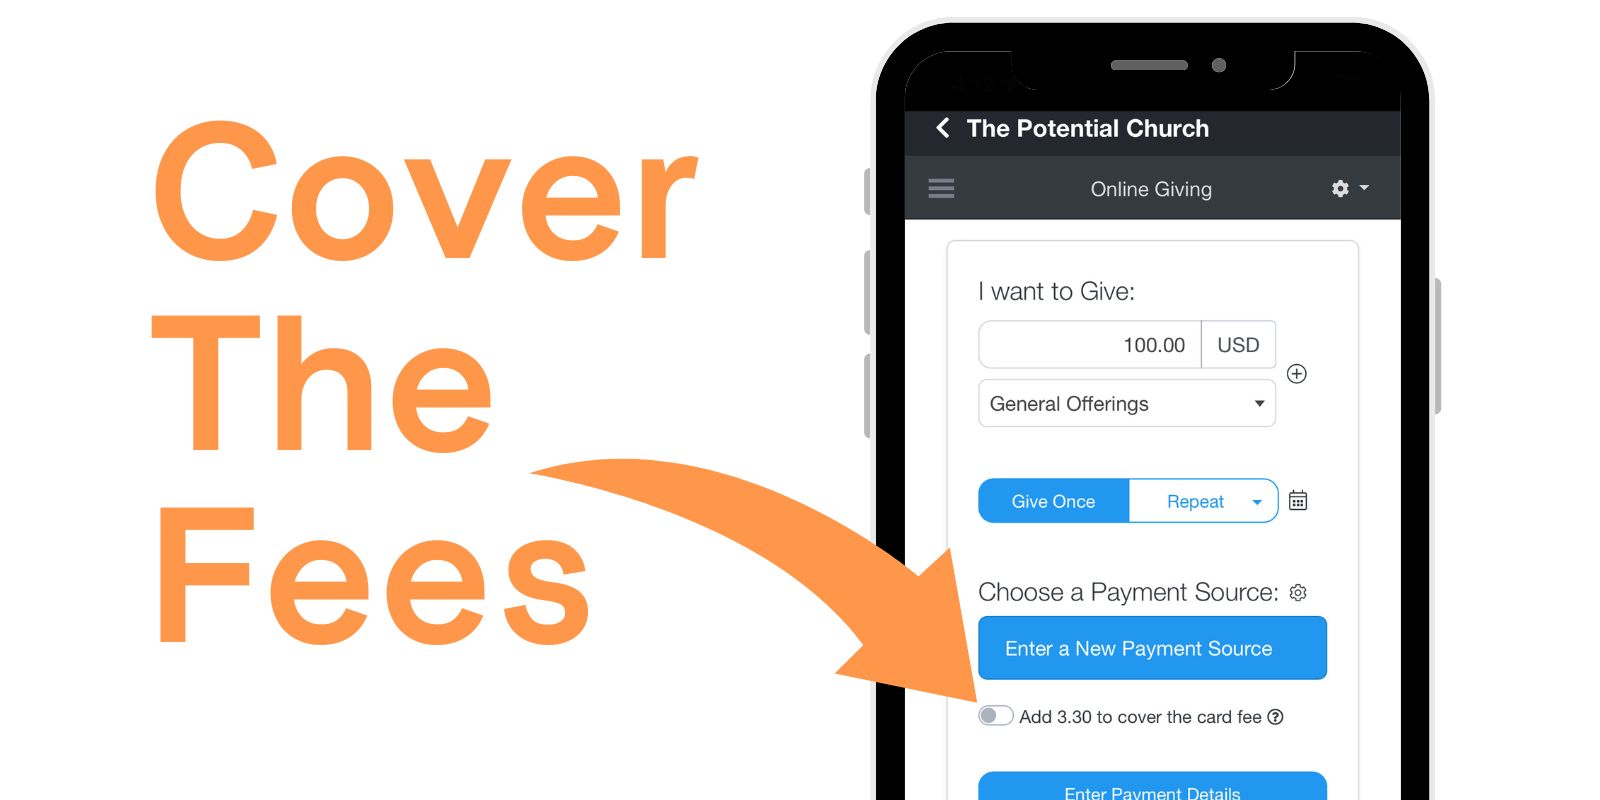 Church Donors can cover processing fees for online donations